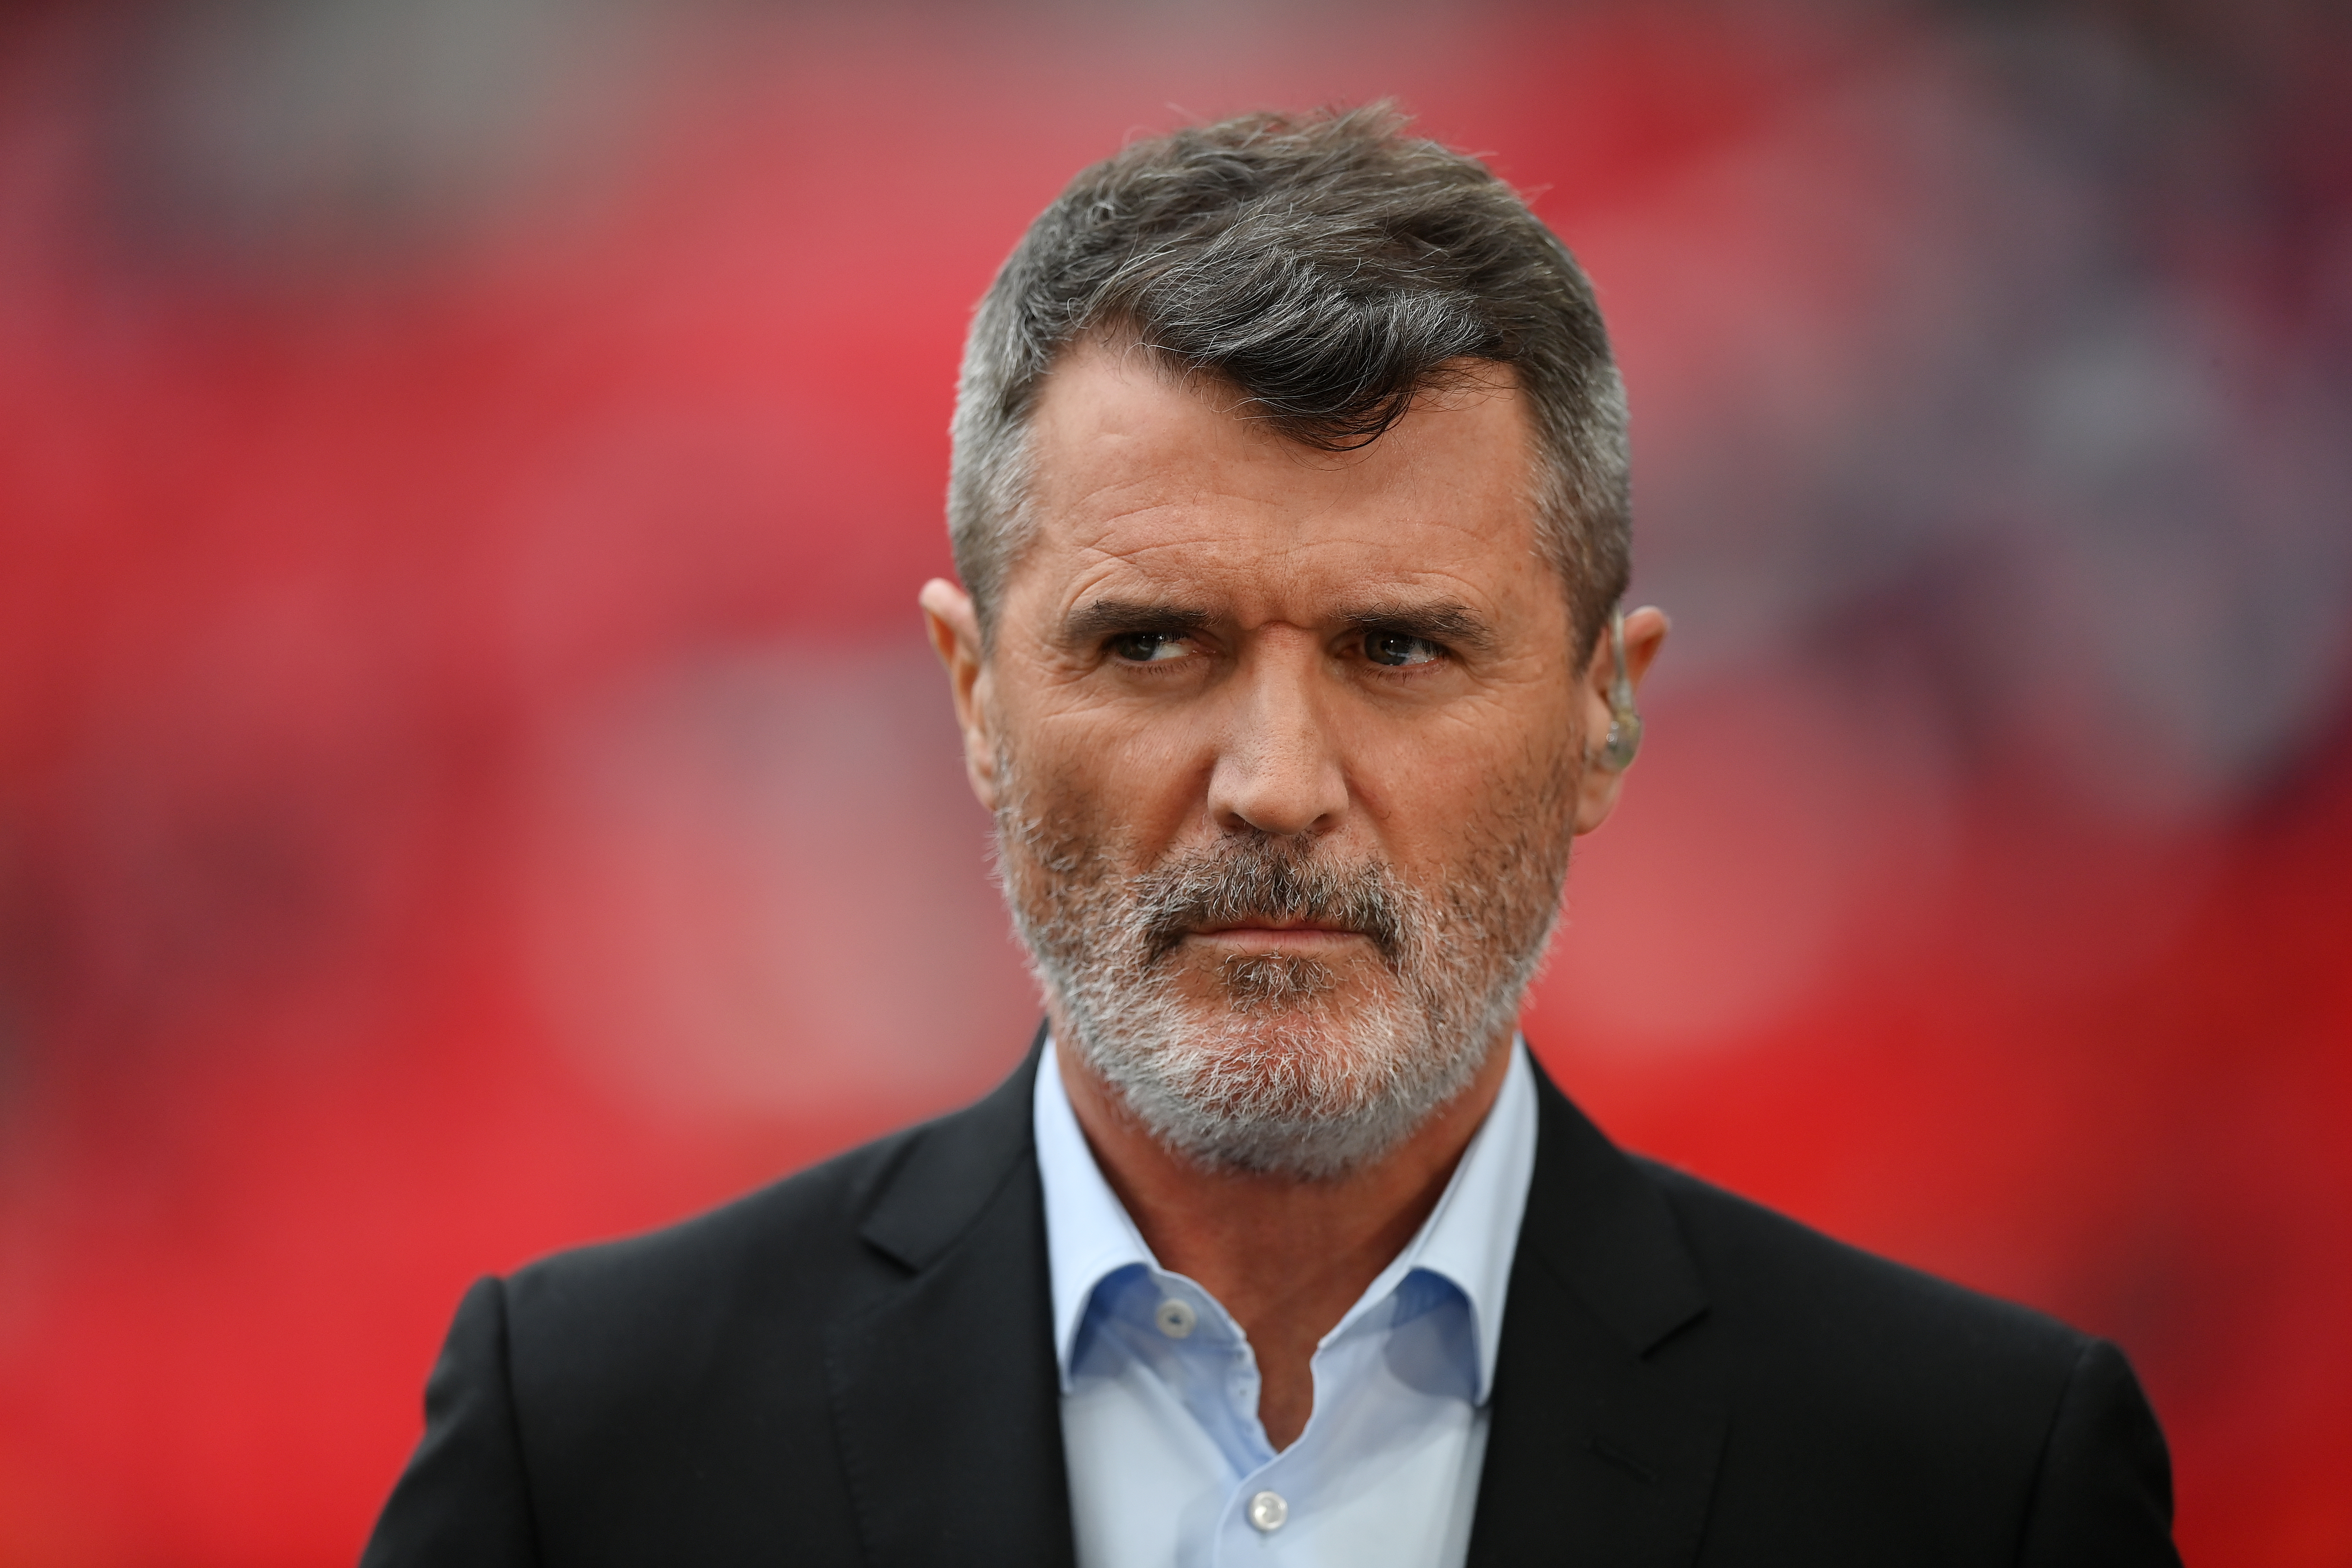 Roy Keane is still the most famous man from Cork, claims Cillian Murphy